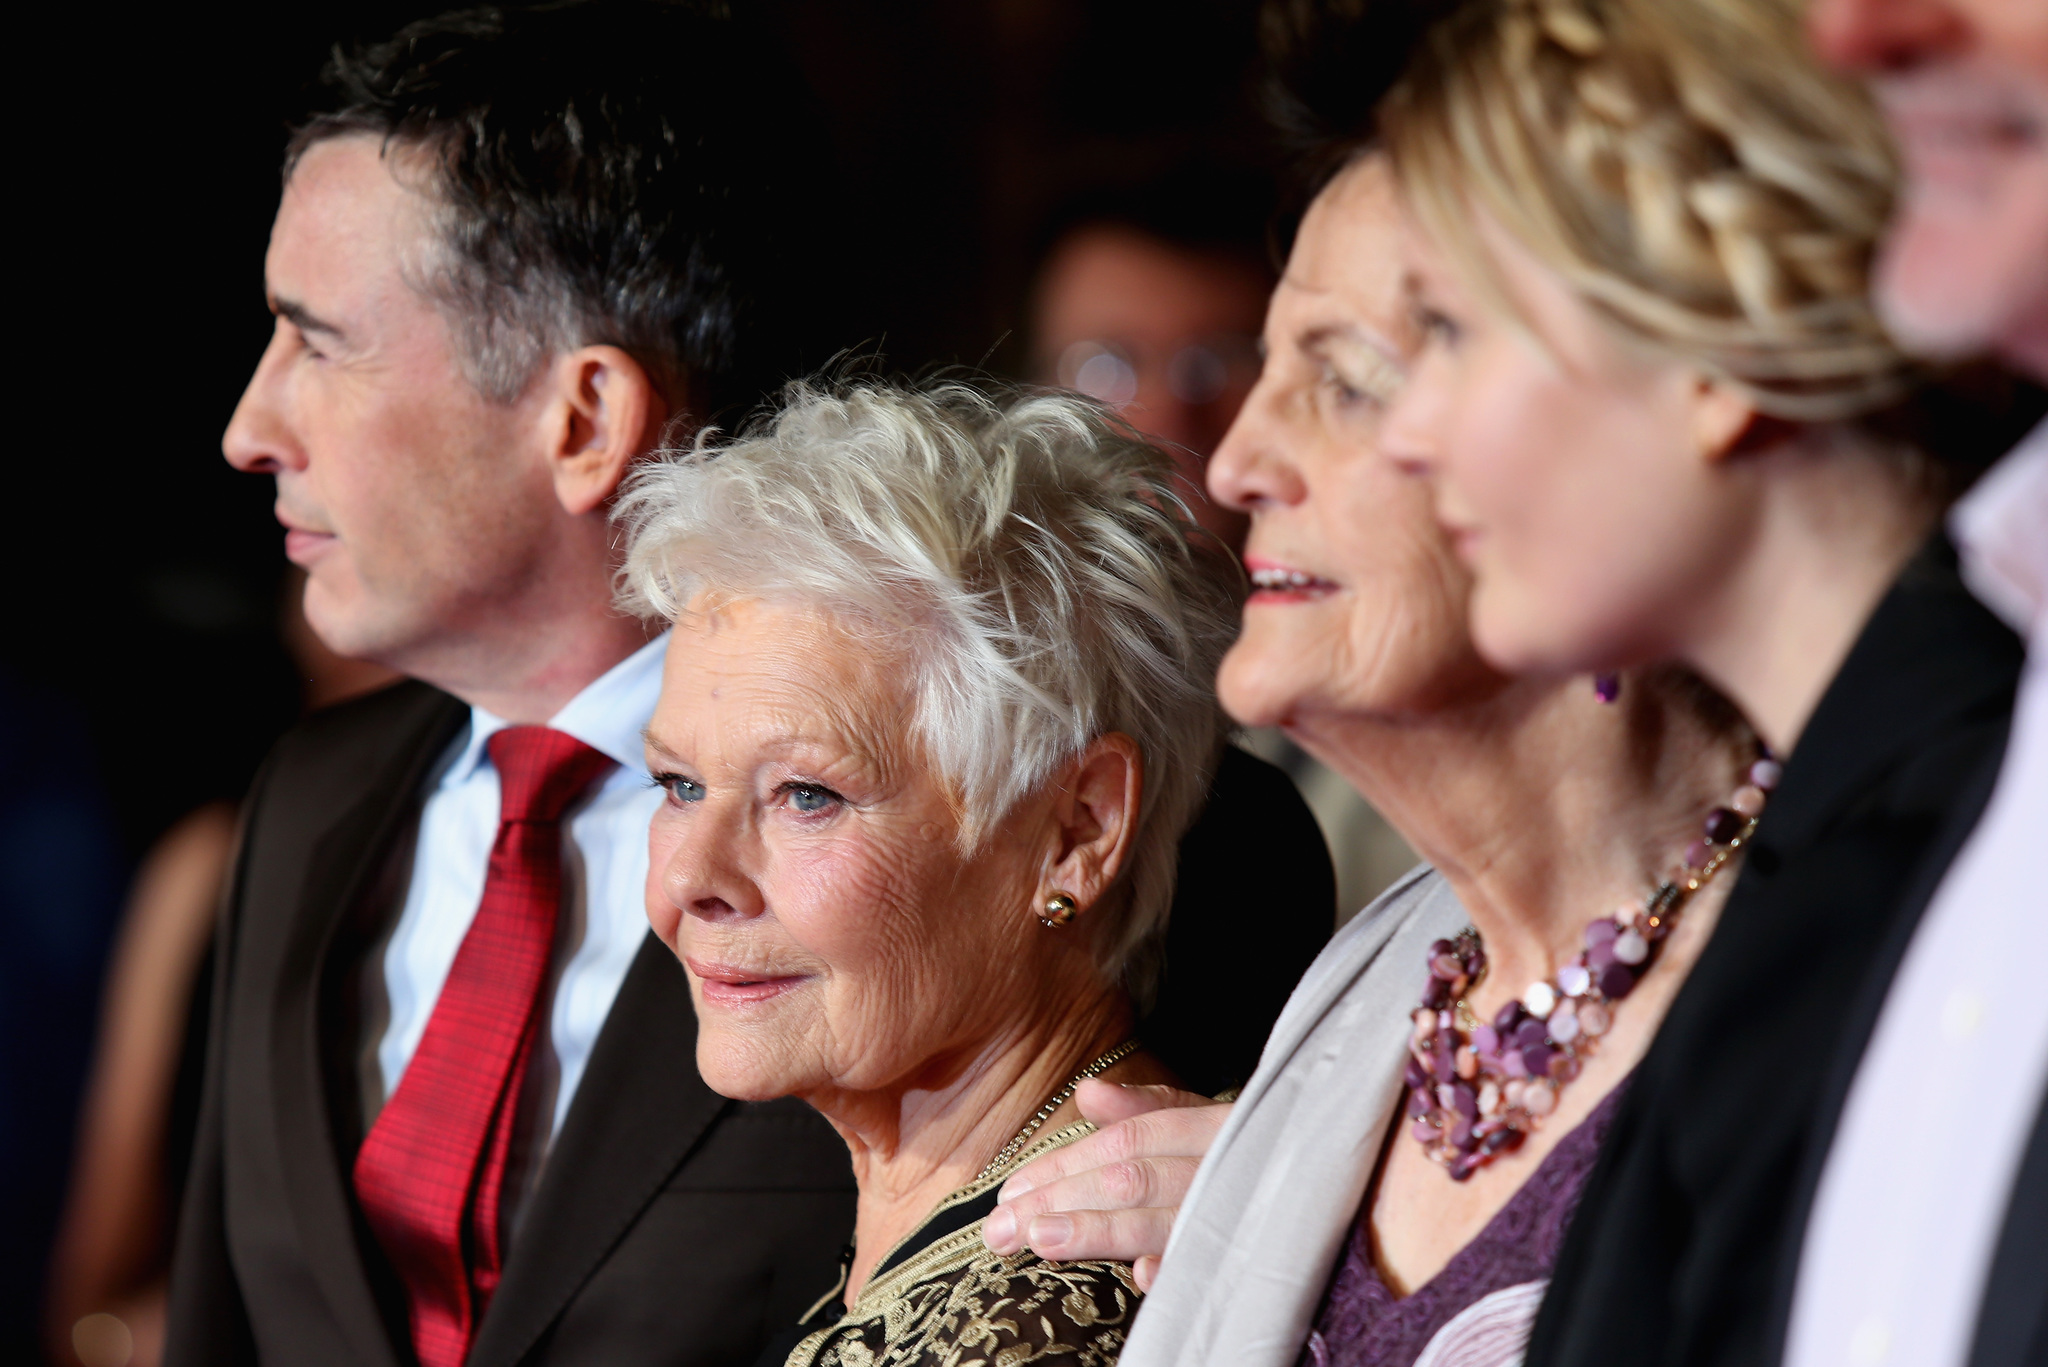 Actors Steve Coogan, Judi Dench, Philomena Lee, actress Sophie Kennedy Clark and Martin Sixsmith attend the 